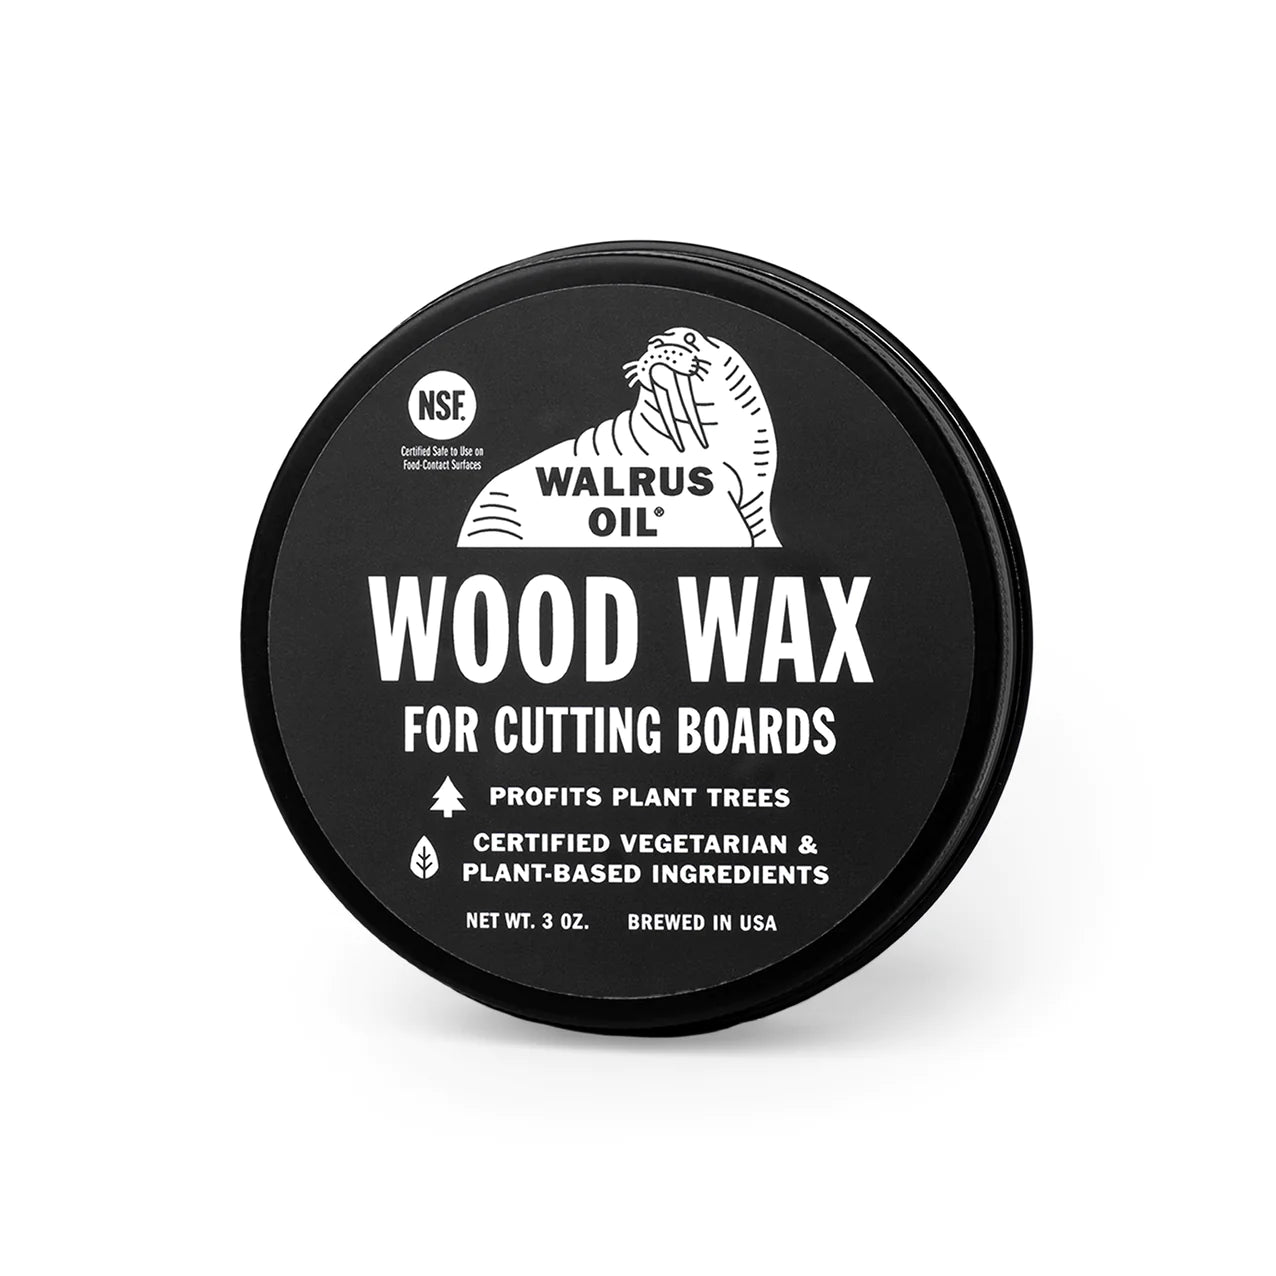 Vegan Cutting Board Wax and Conditioner - 100% Plant Based